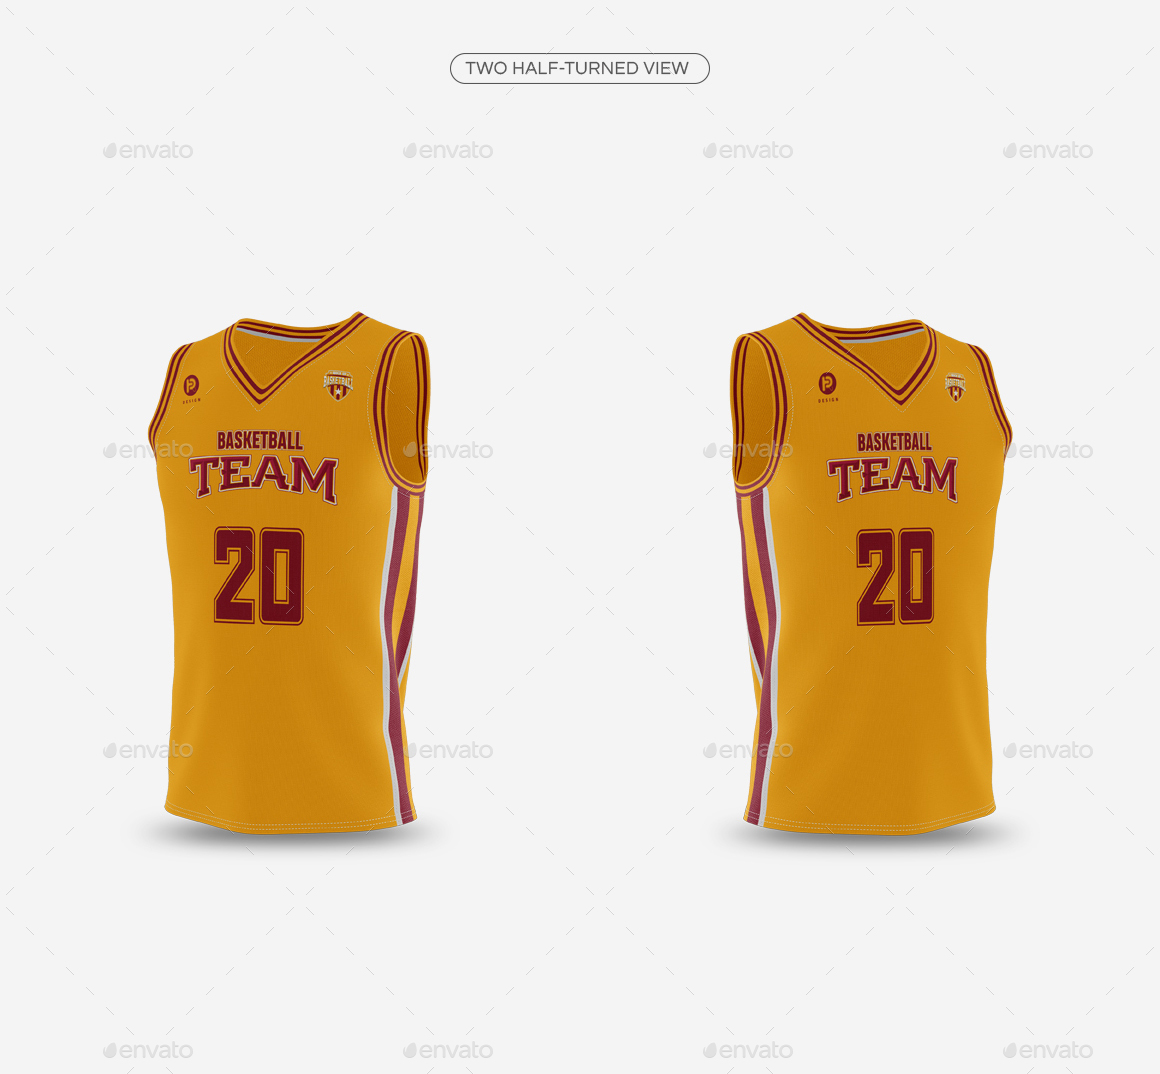 Download 13+ Basketball Jersey With V-Neck Mockup Front View ...